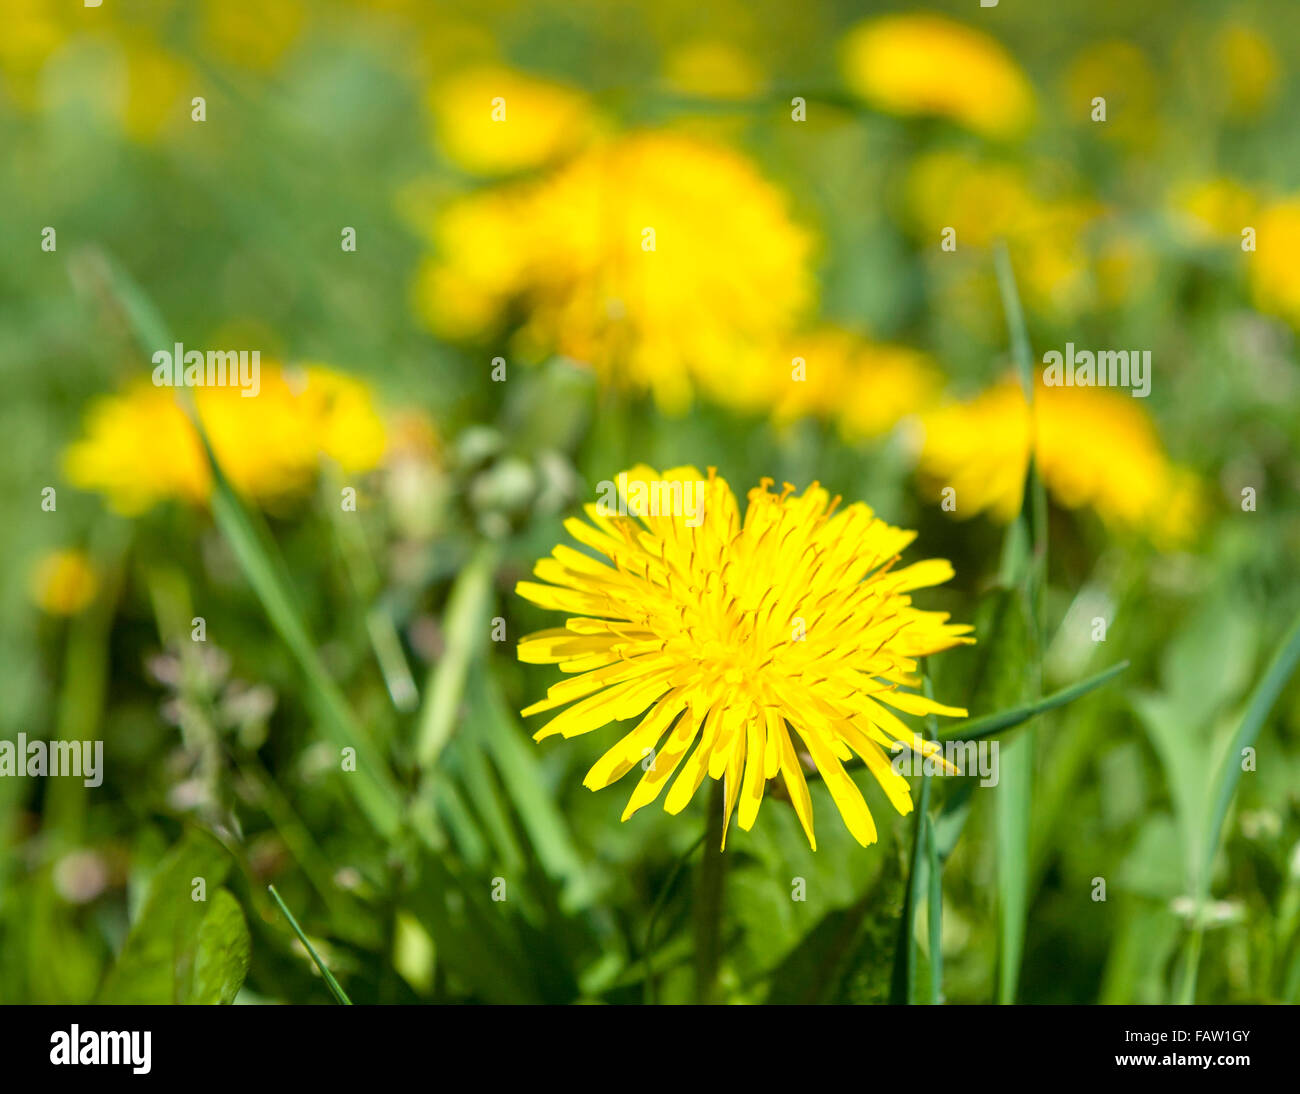 Dandelion (Taraxacum officinale), the common dandelion, is a flowering herbaceous perennial plant of the family Asteraceae (Compositae)  Model Release: No.  Property Release: No. Stock Photo